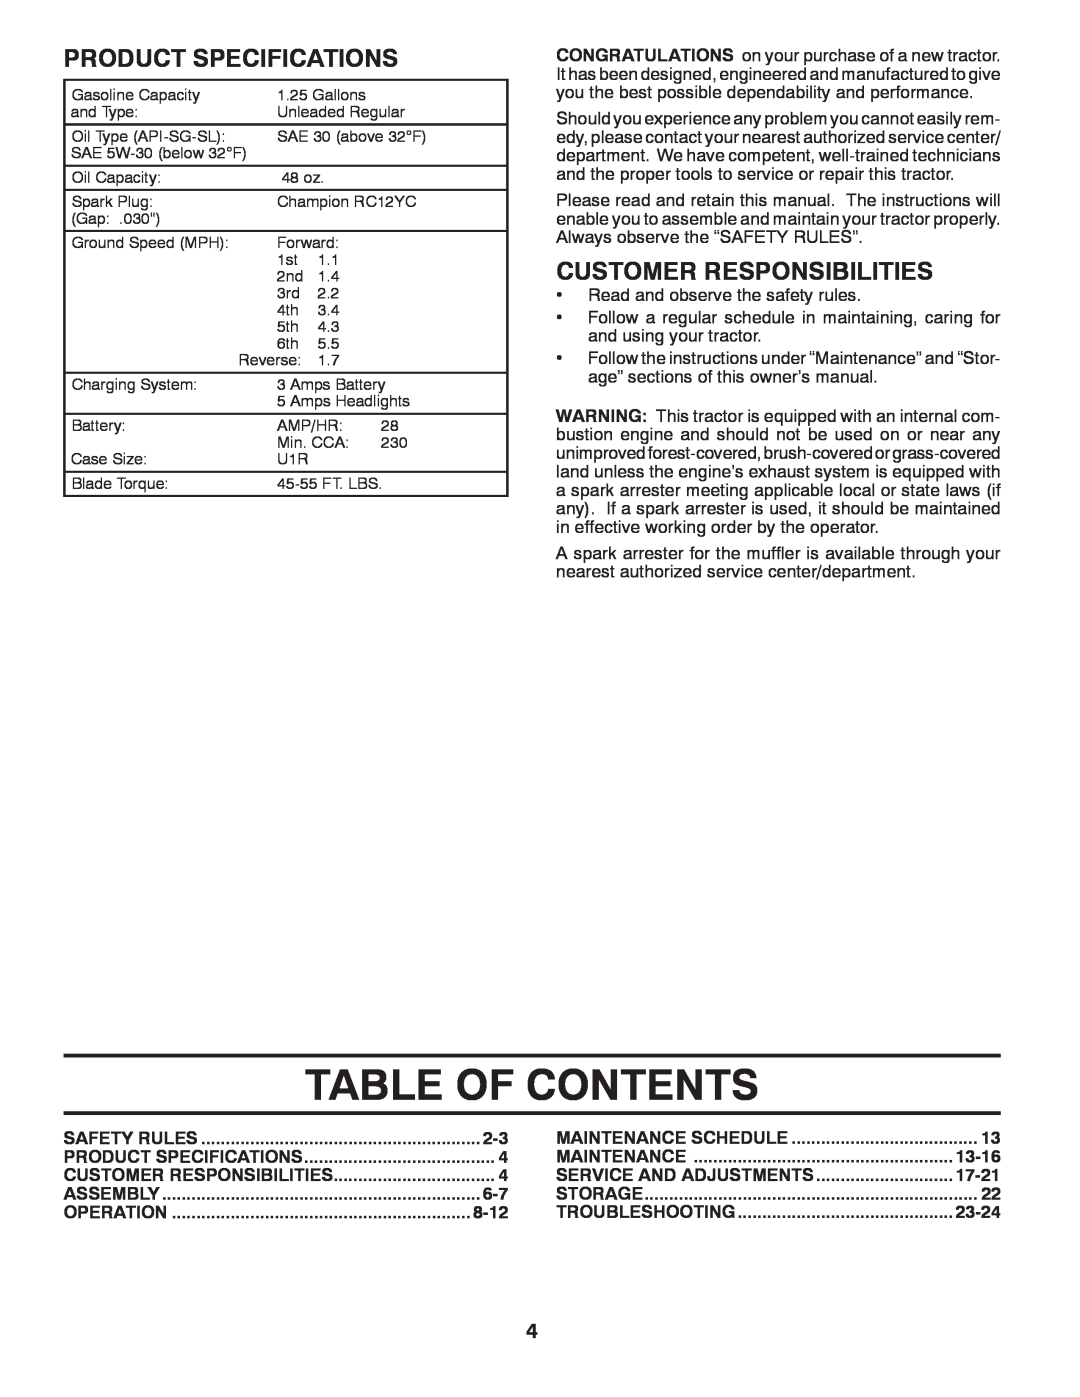 McCulloch 532 40 80-72 manual Table Of Contents, Product Specifications, Customer Responsibilities 